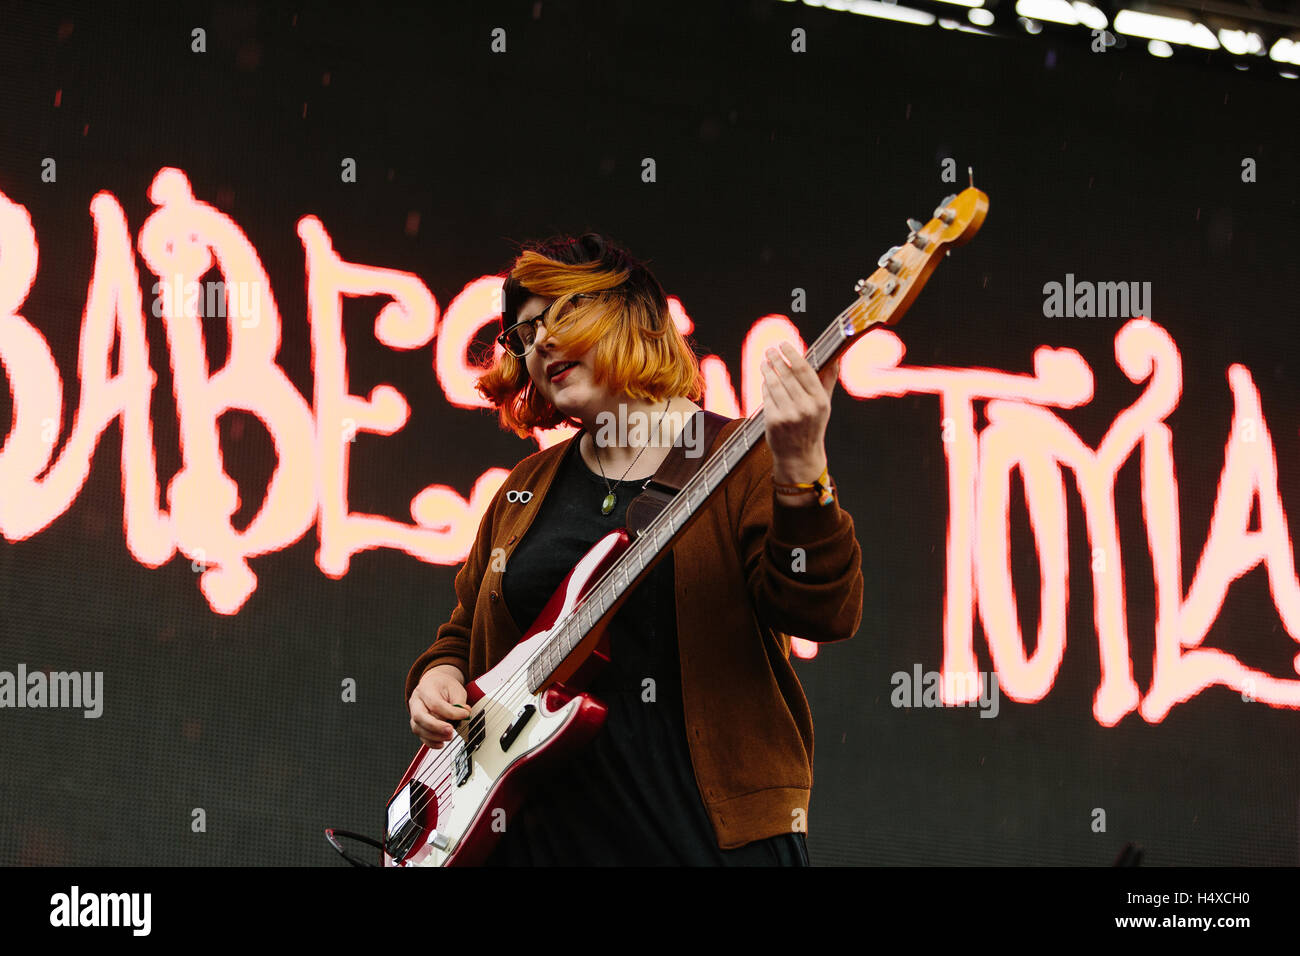 Babes in Toyland performs at Bumbershoot Festival on September 5, 2015 in Seattle, Washington. Stock Photo